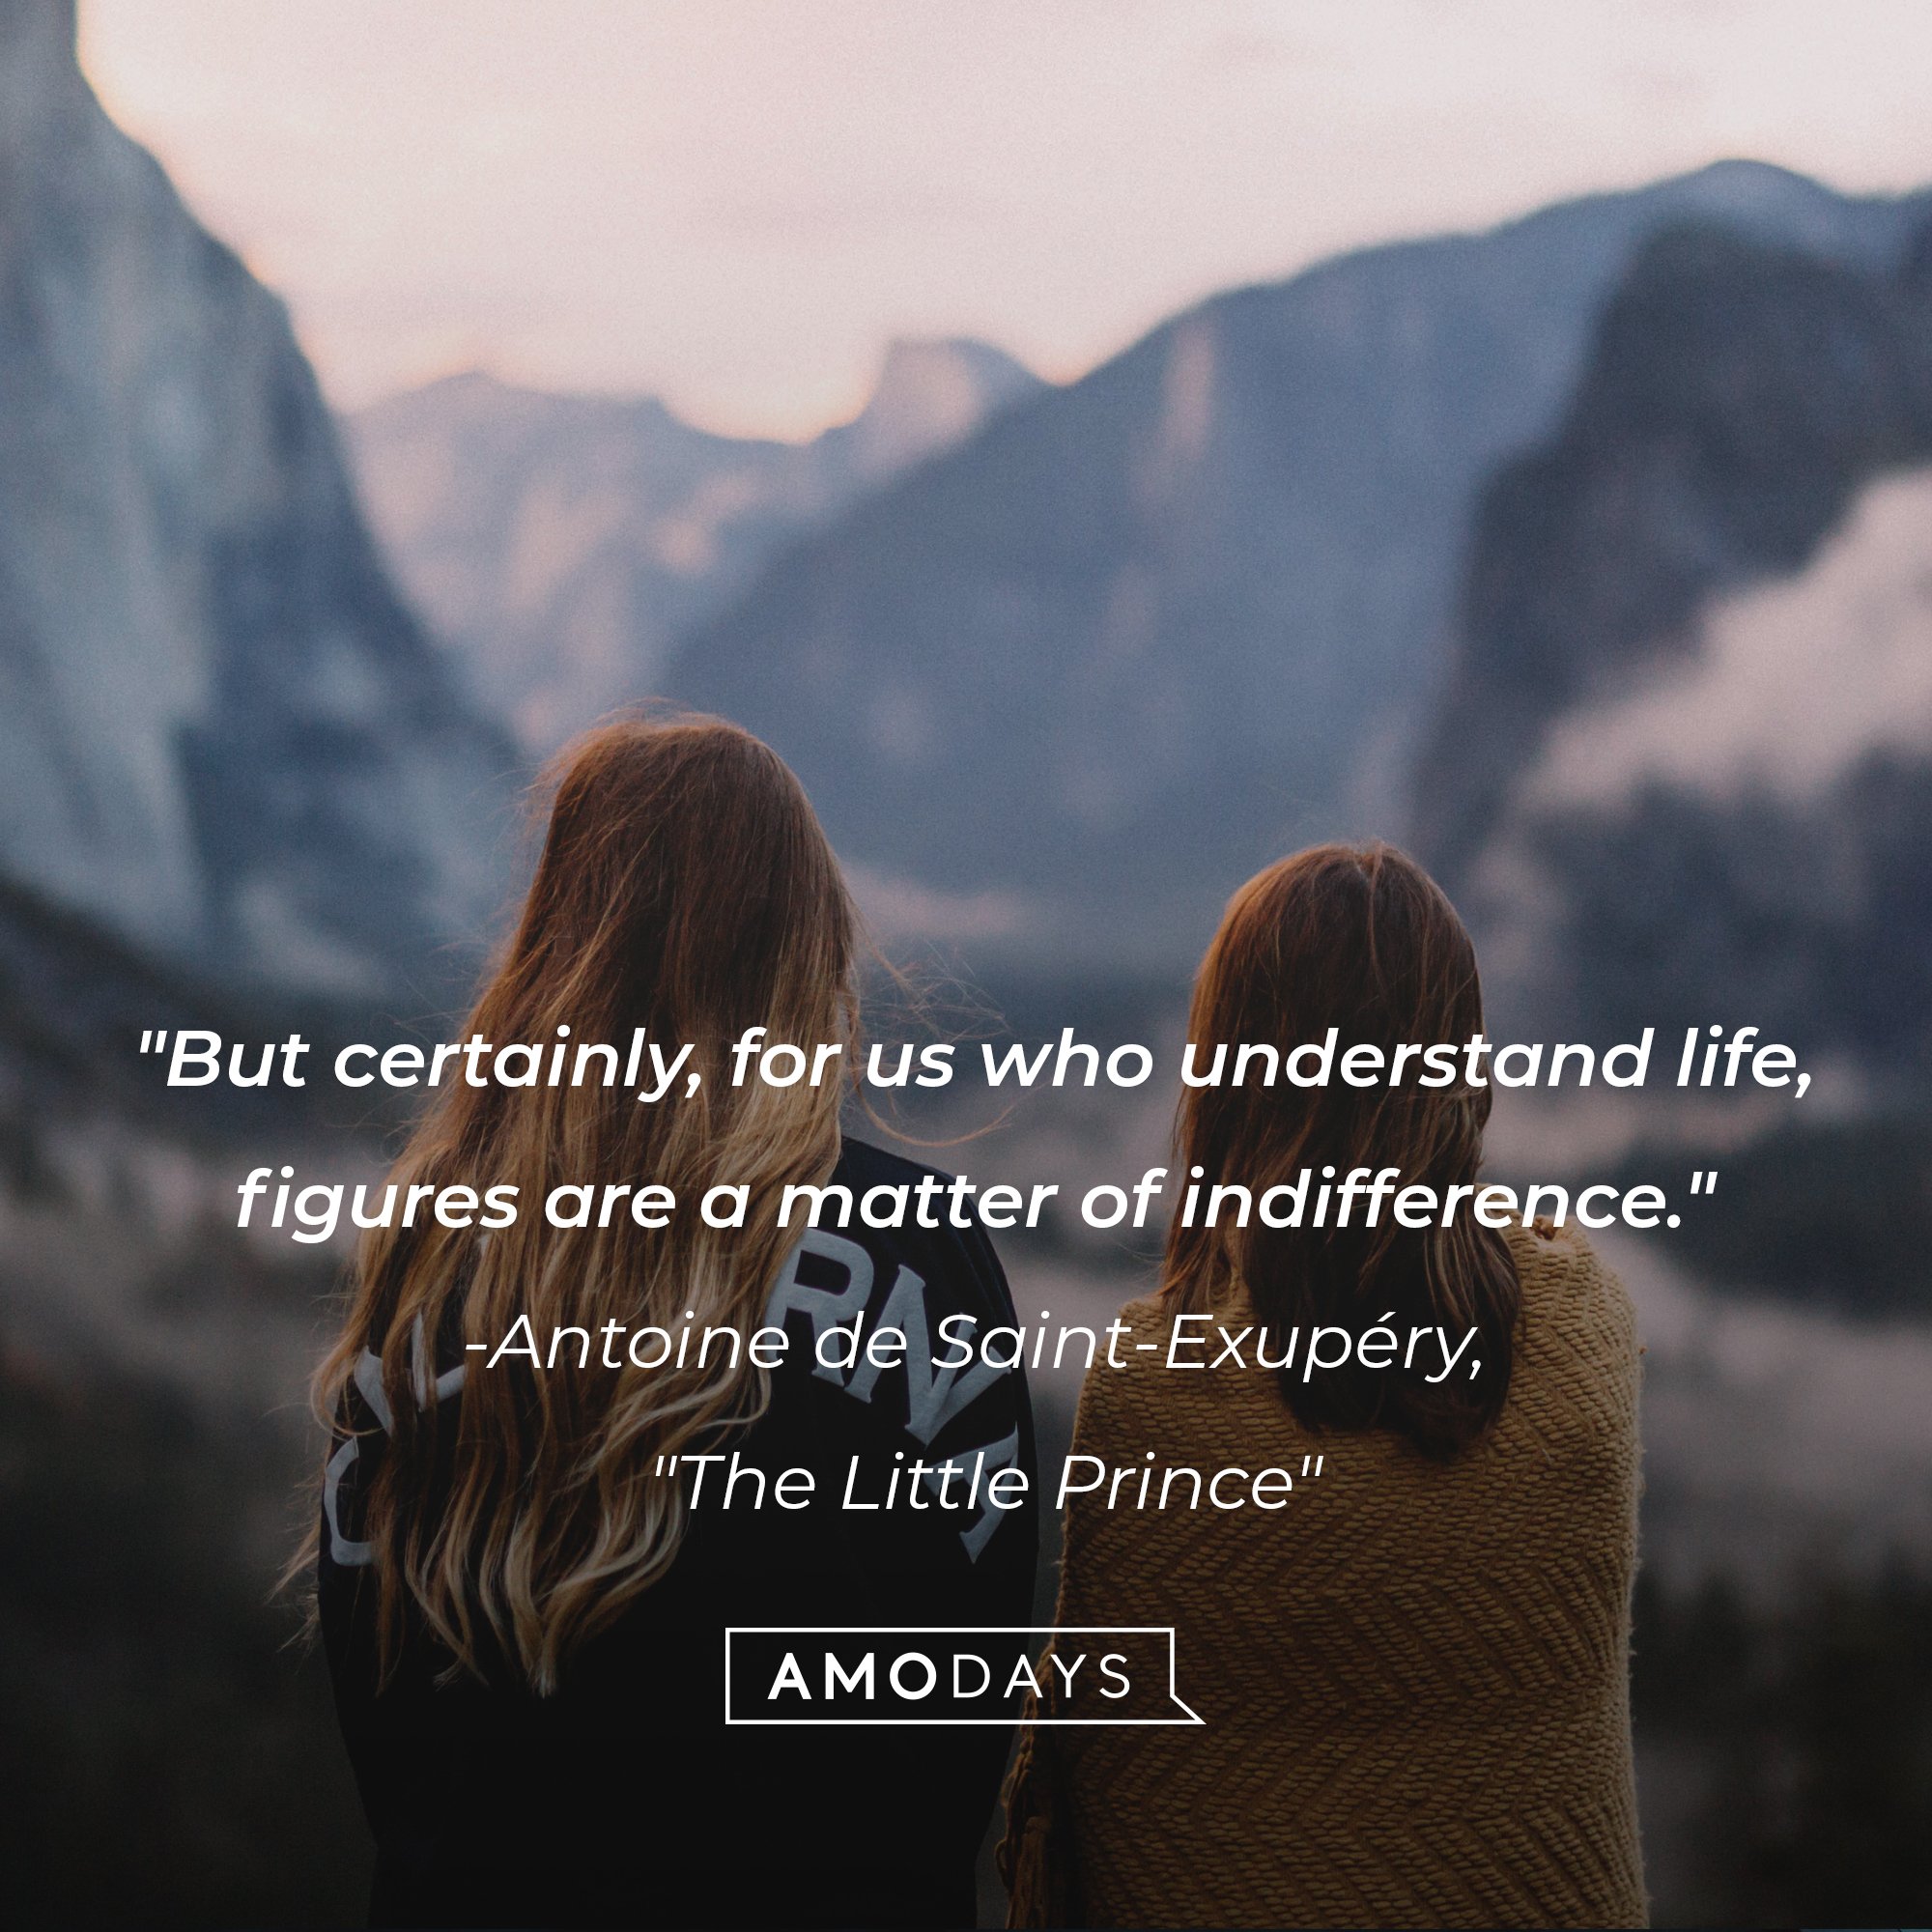 Antoine de Saint-Exupéry's "The Little Prince" quote: "But certainly, for us who understand life, figures are a matter of indifference." | Image: AmoDays